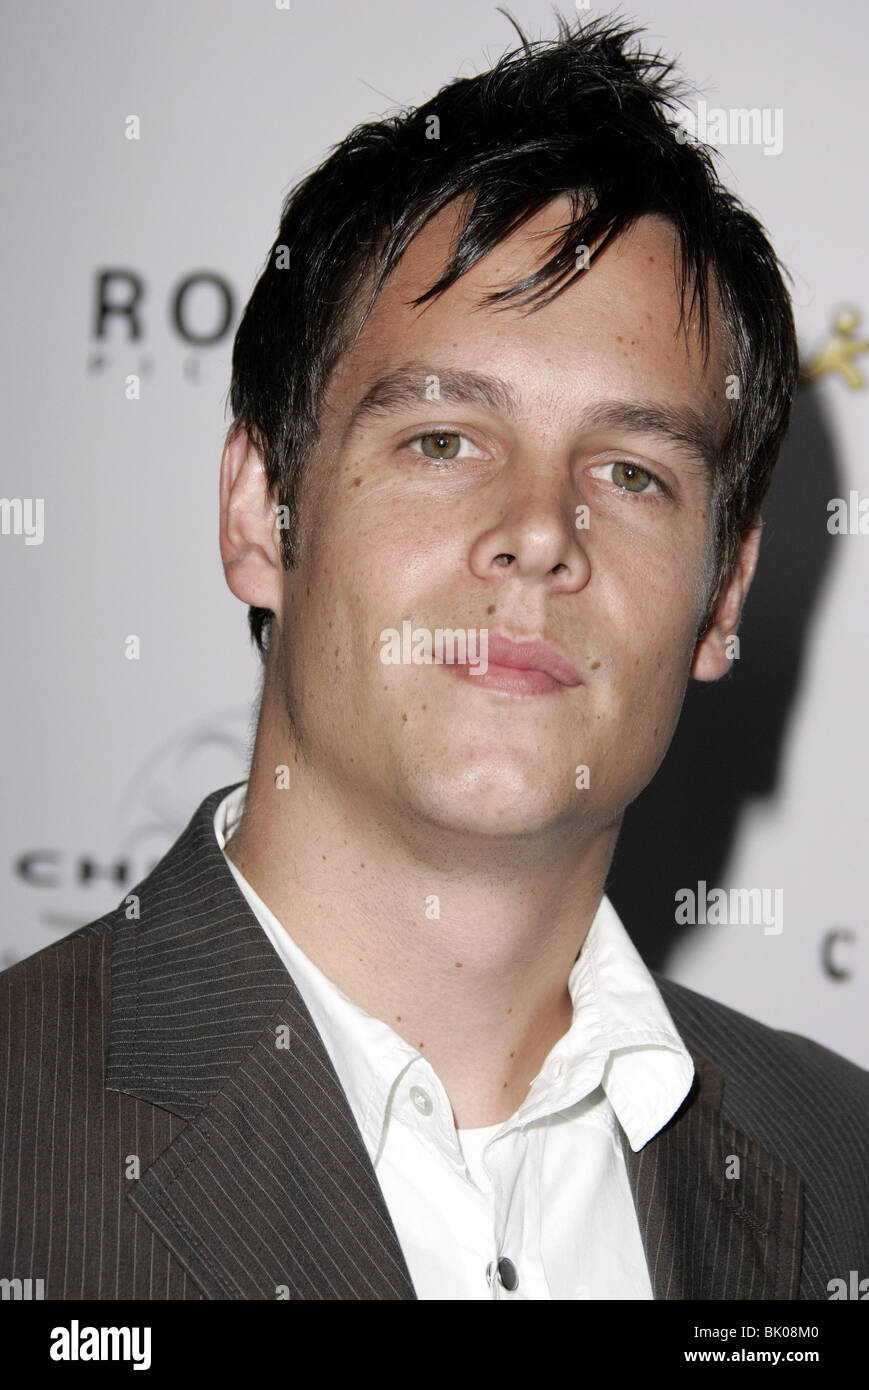 NICK NANTELL PREMIERE FILM CRY WOLF CINÉMA ARCLIGHT HOLLYWOOD LOS ANGELES USA 15 Septembre 2005 Banque D'Images